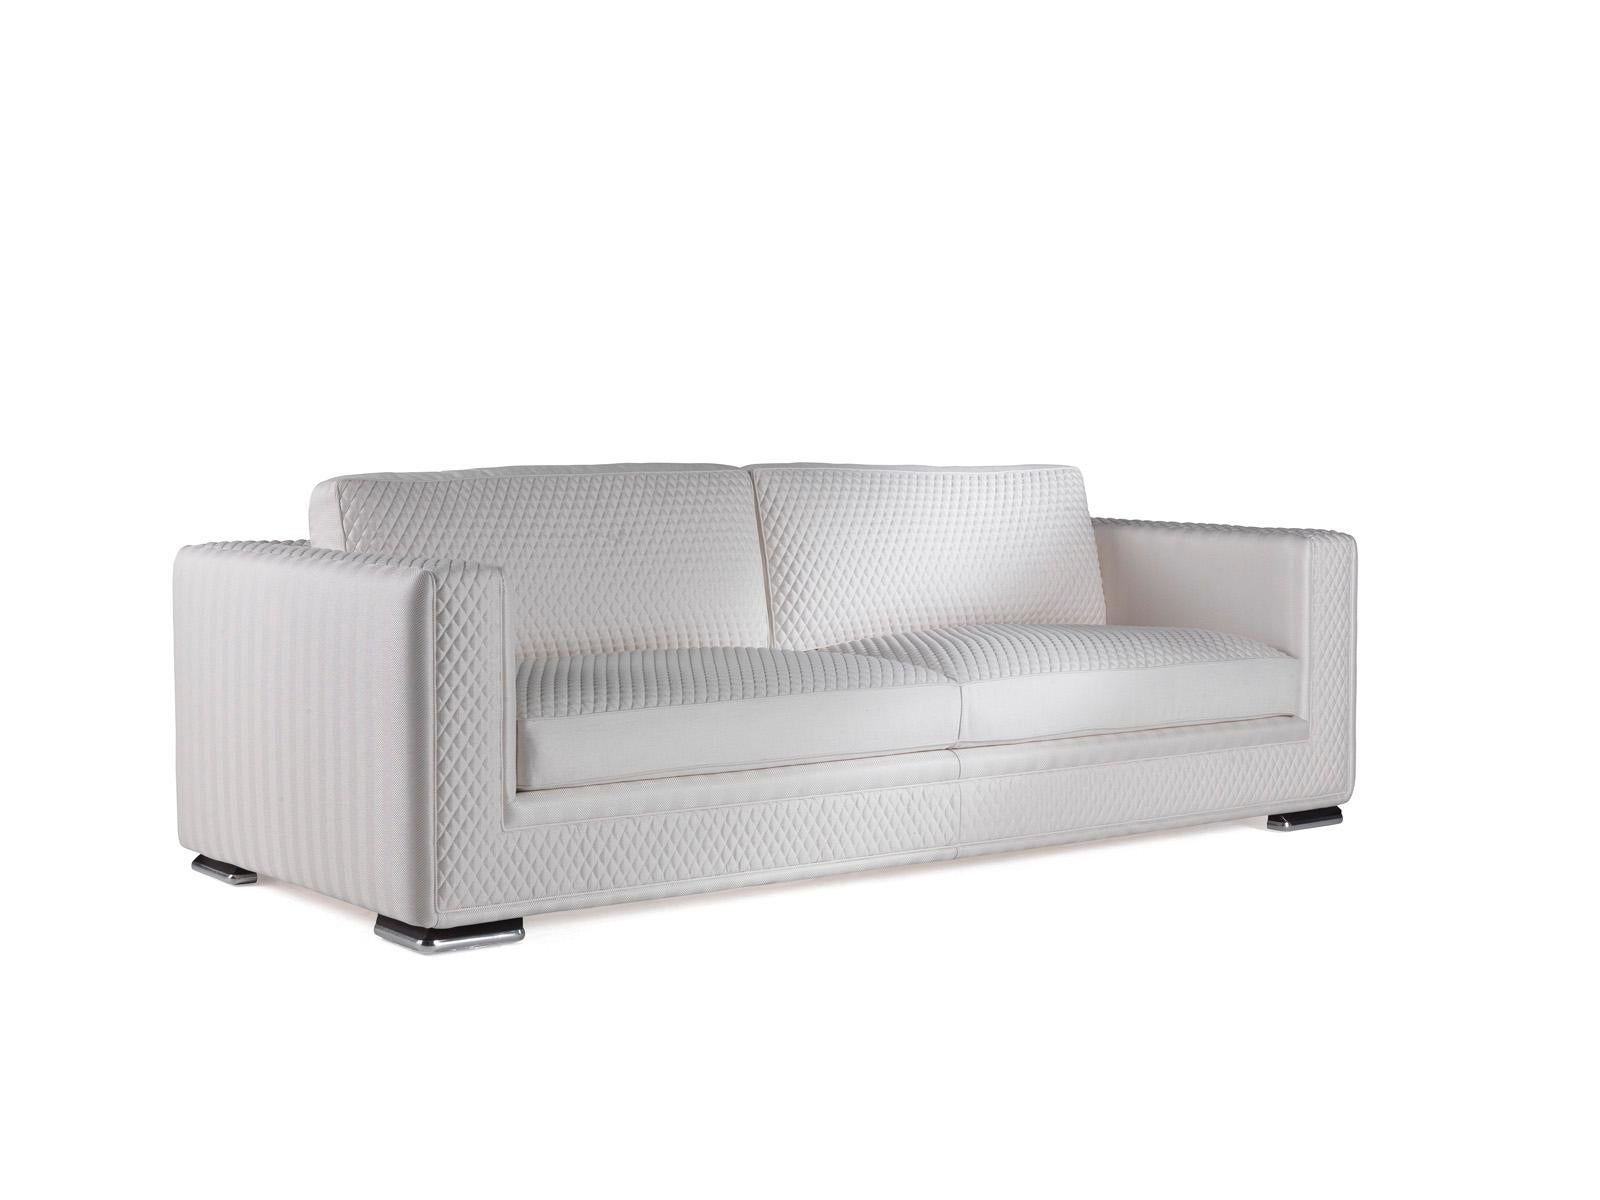 City life contemporary Italian three-seat sofa in striped fabric with embroidered cushions and details by Zanaboni.
 
Please note: Prices do not include VAT. VAT may be added depending on the ship-to location.